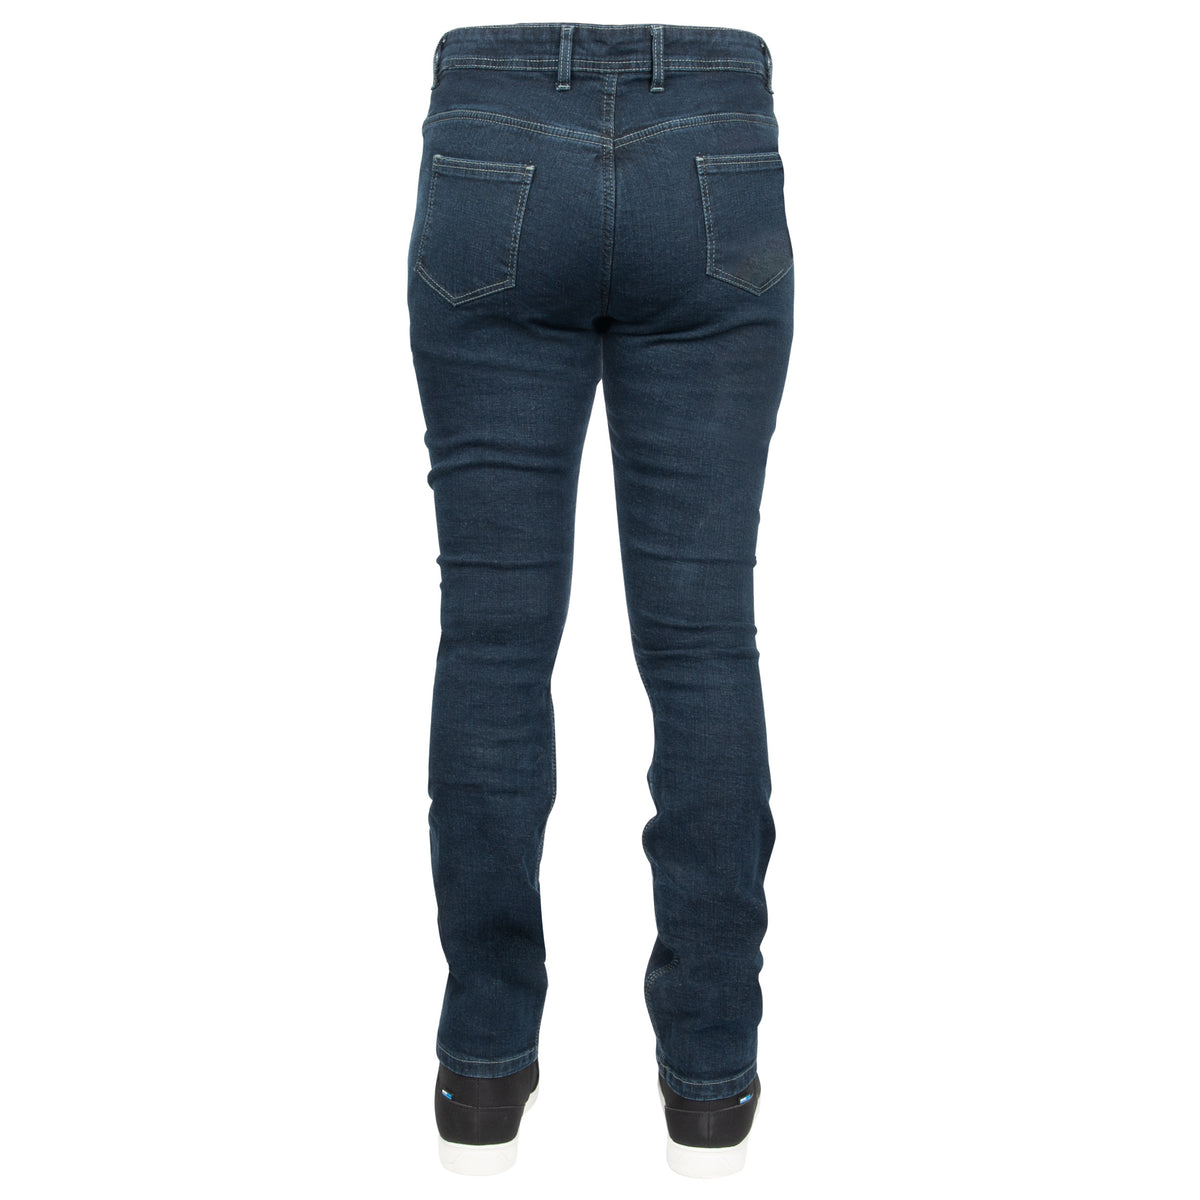 Queensway Reinforced/ Armoured Jeans